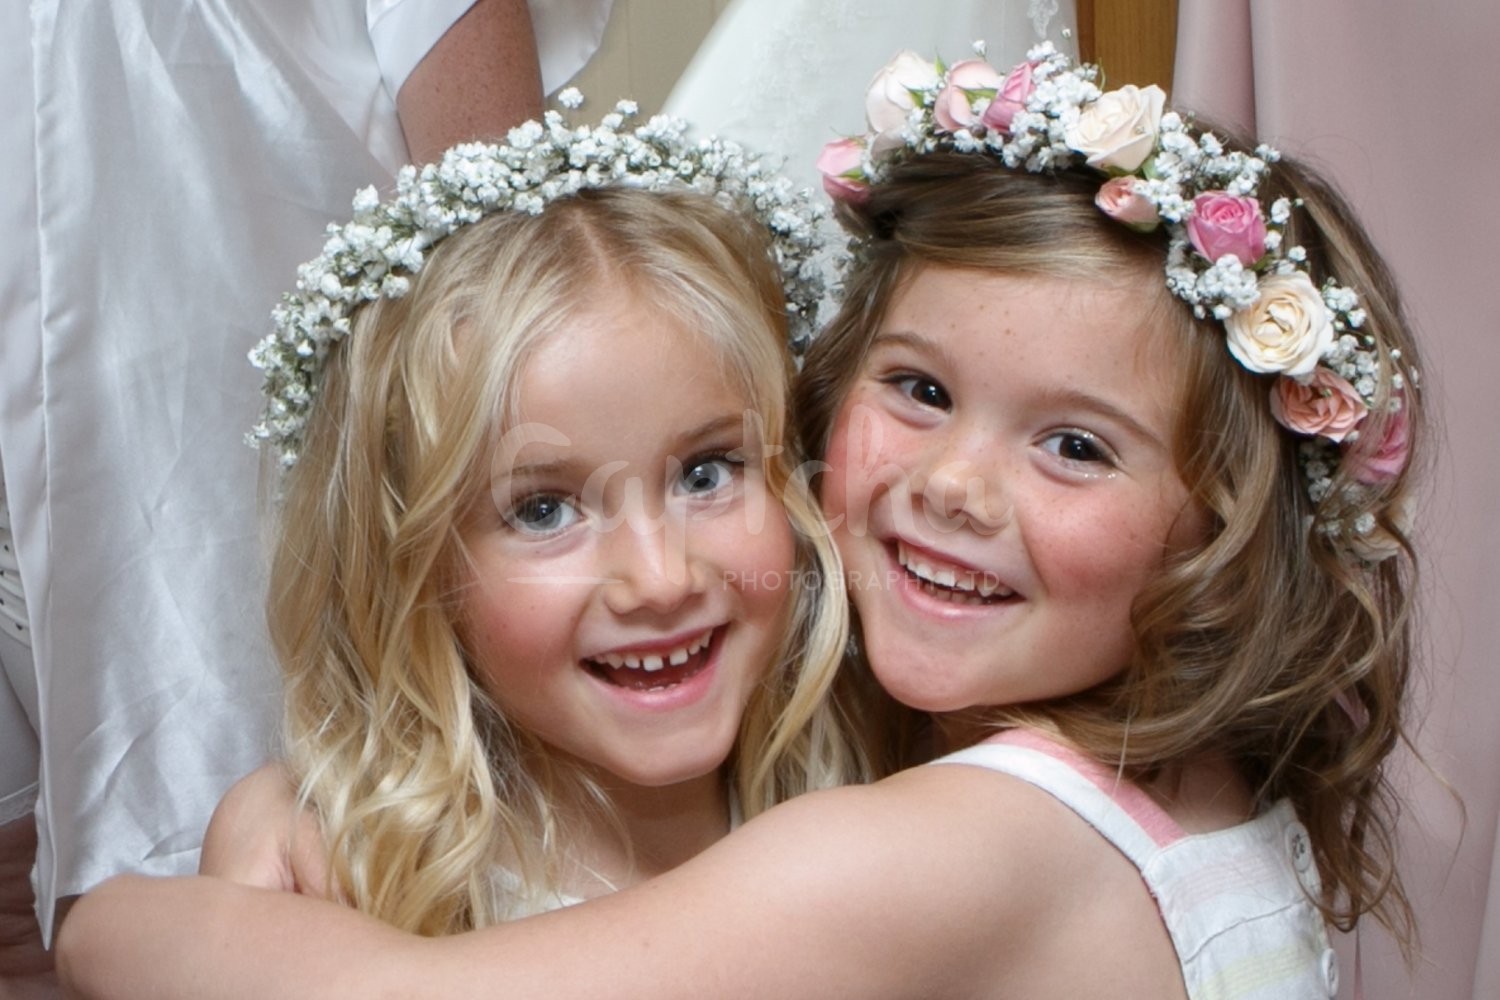 Its just as exciting as Christmas bridesmaids, excited, wedding day, getting ready, flowers in hair, yew lodge hotel